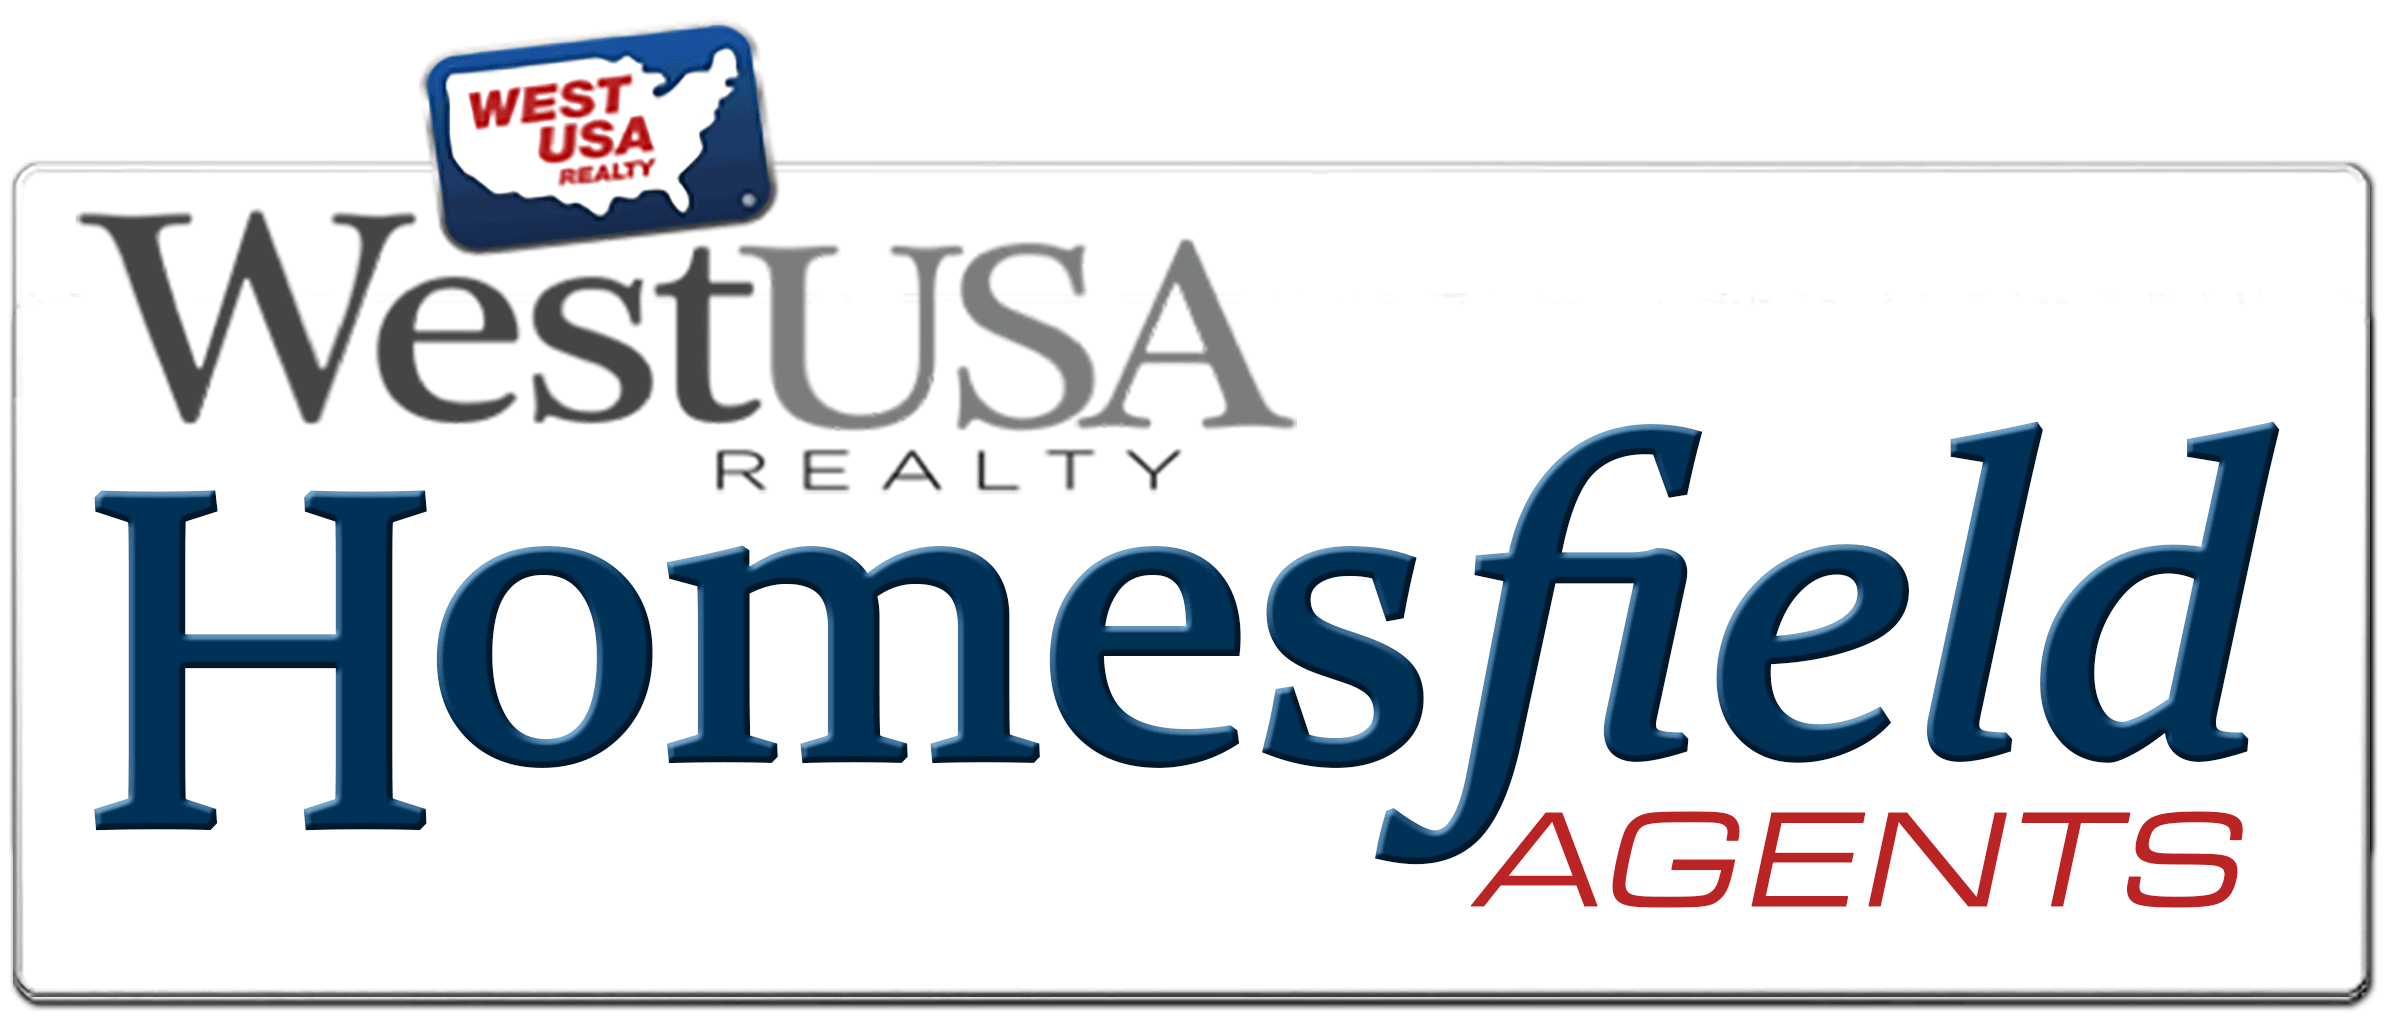 West USA Realty in Arizona